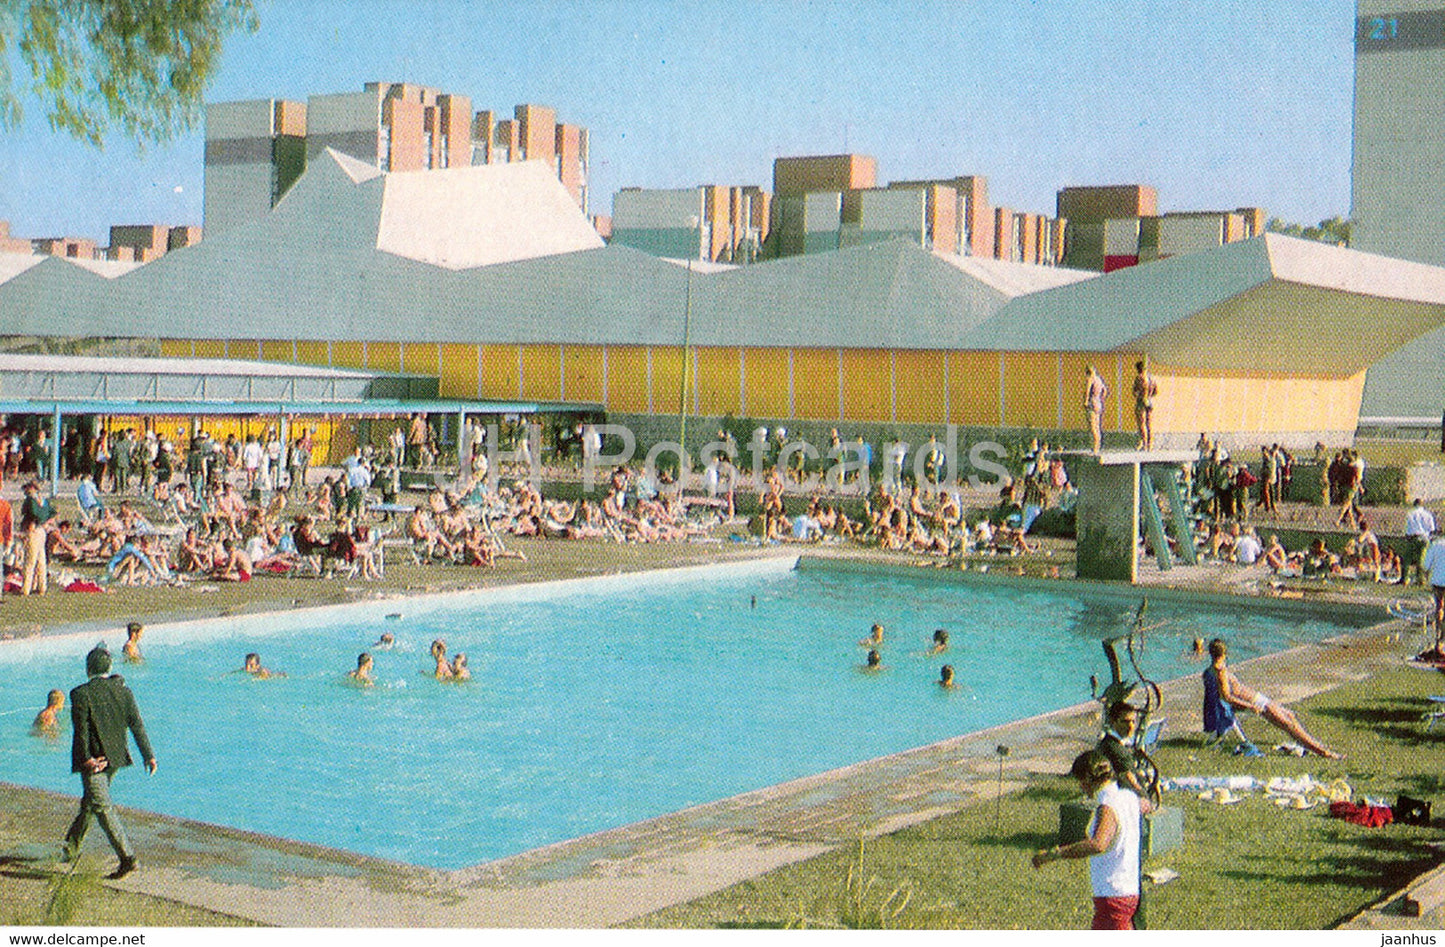 Olympic Games Mexico 1968 - Pool in the Olympic Village - sport - 1970 - Mexico - unused - JH Postcards